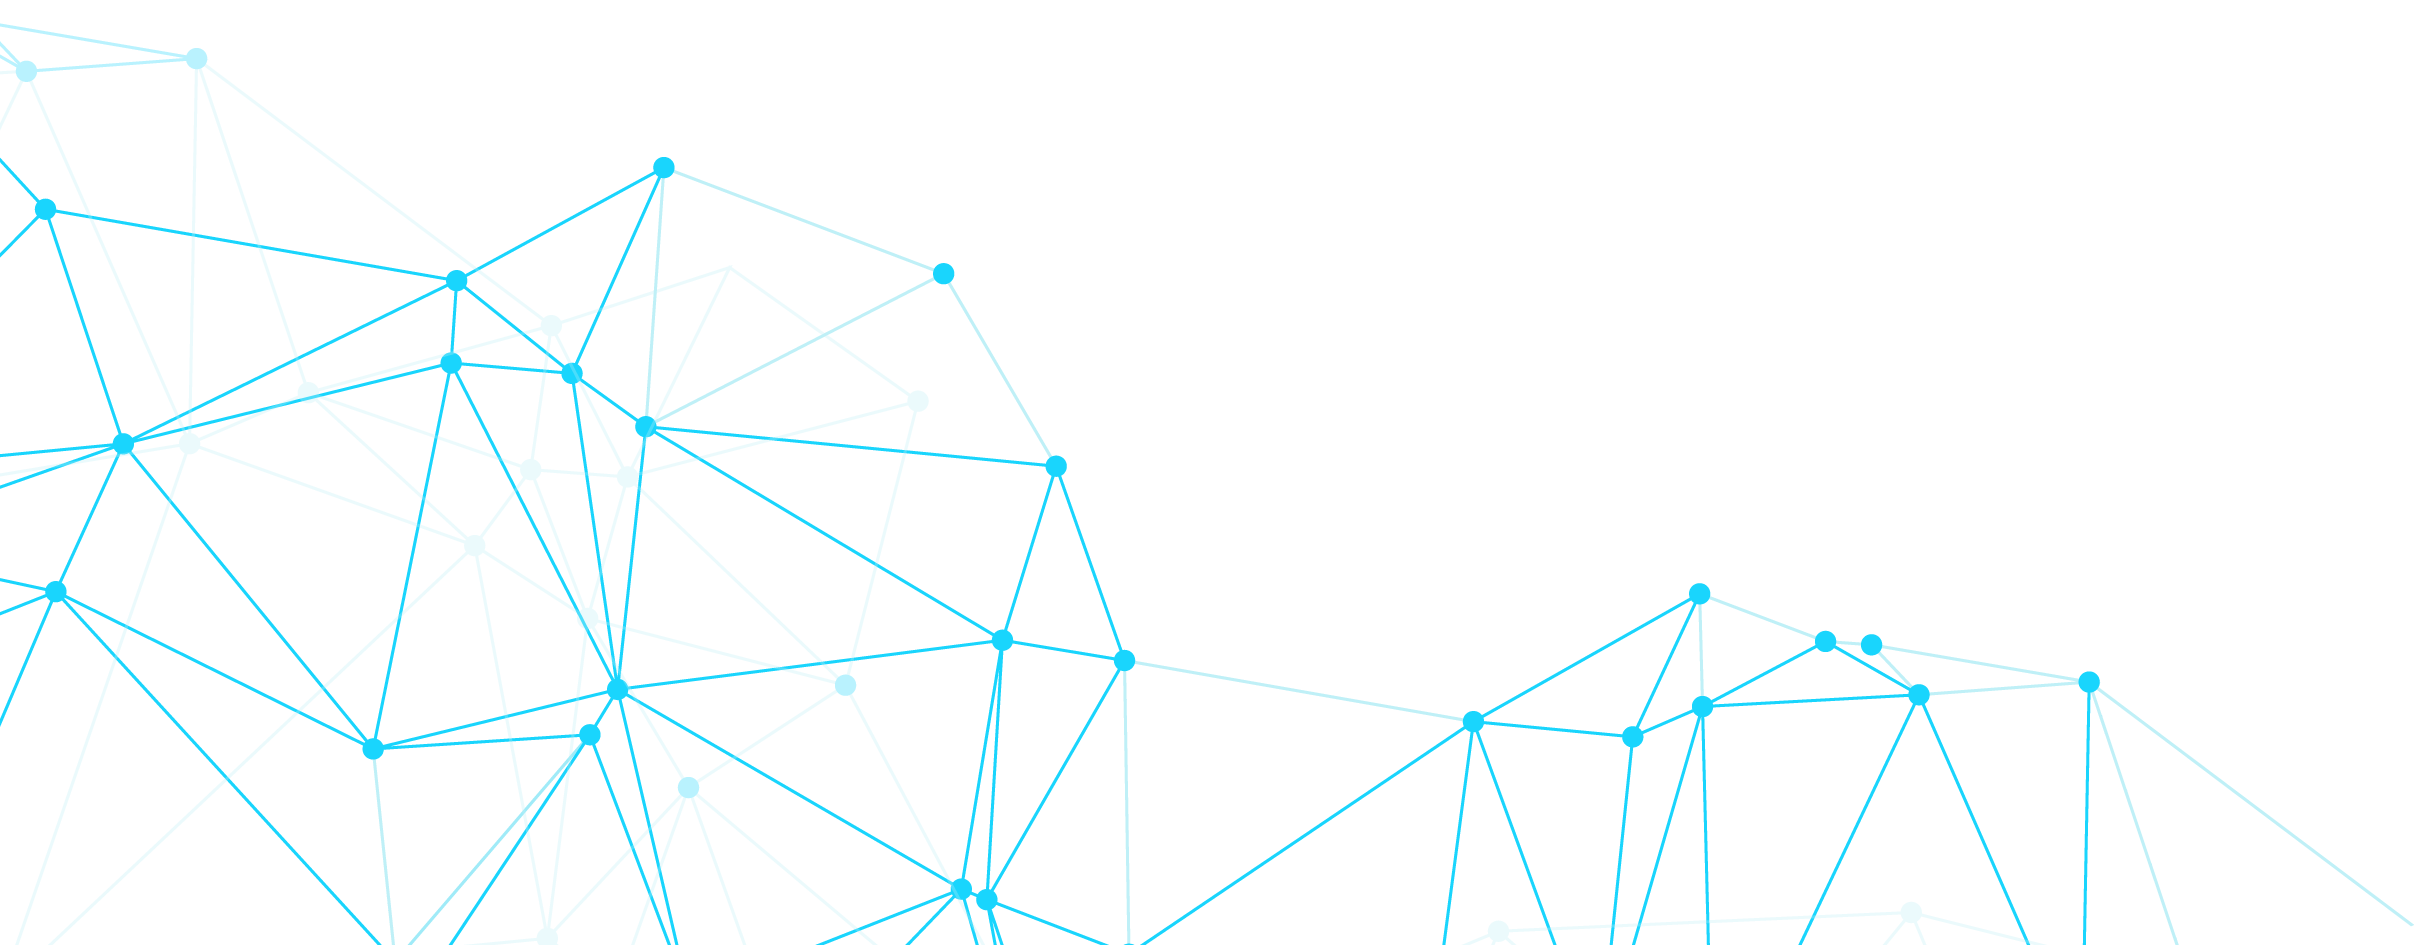 Abstract geometric network of blue lines and white dots connected on a black background, ready to get a quote for your SEO needs.